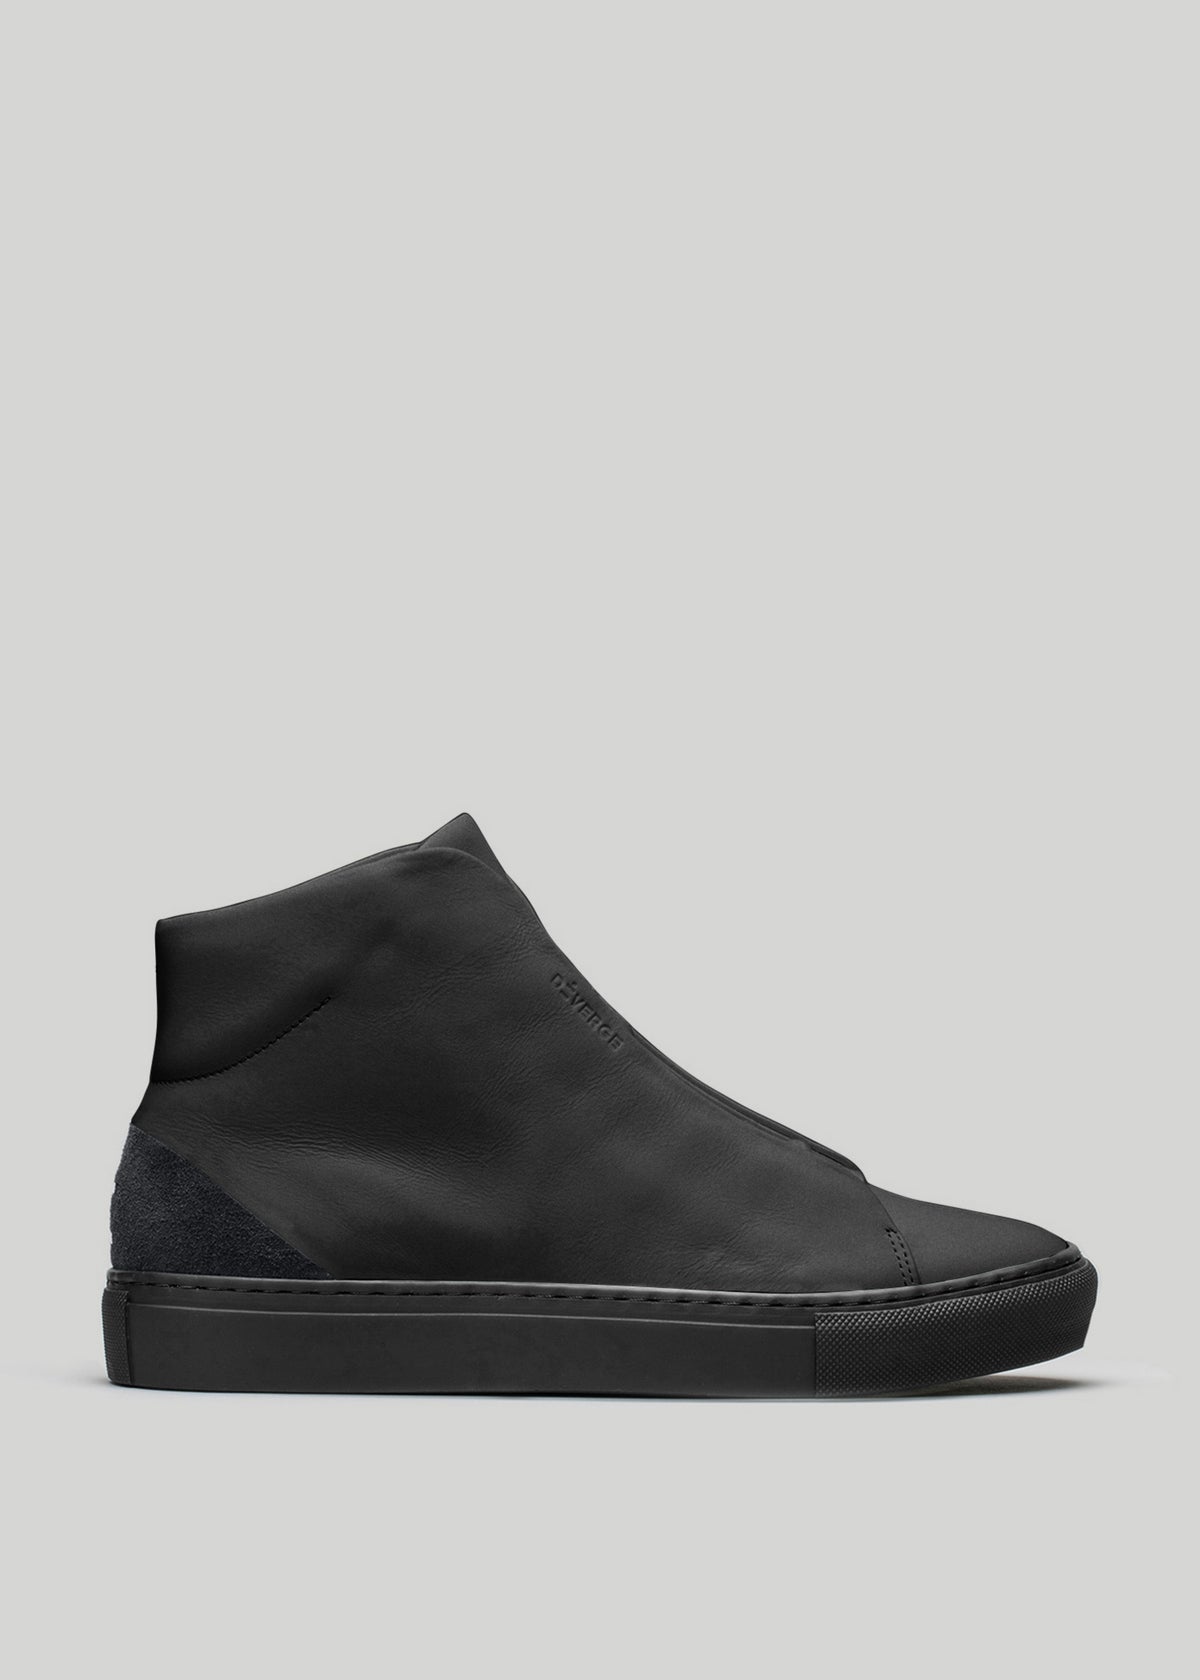 A single MH0014 Pyck's Kicks Black Canvas high-top sneaker with a smooth leather surface and suede heel detail, displayed against a plain light grey background.